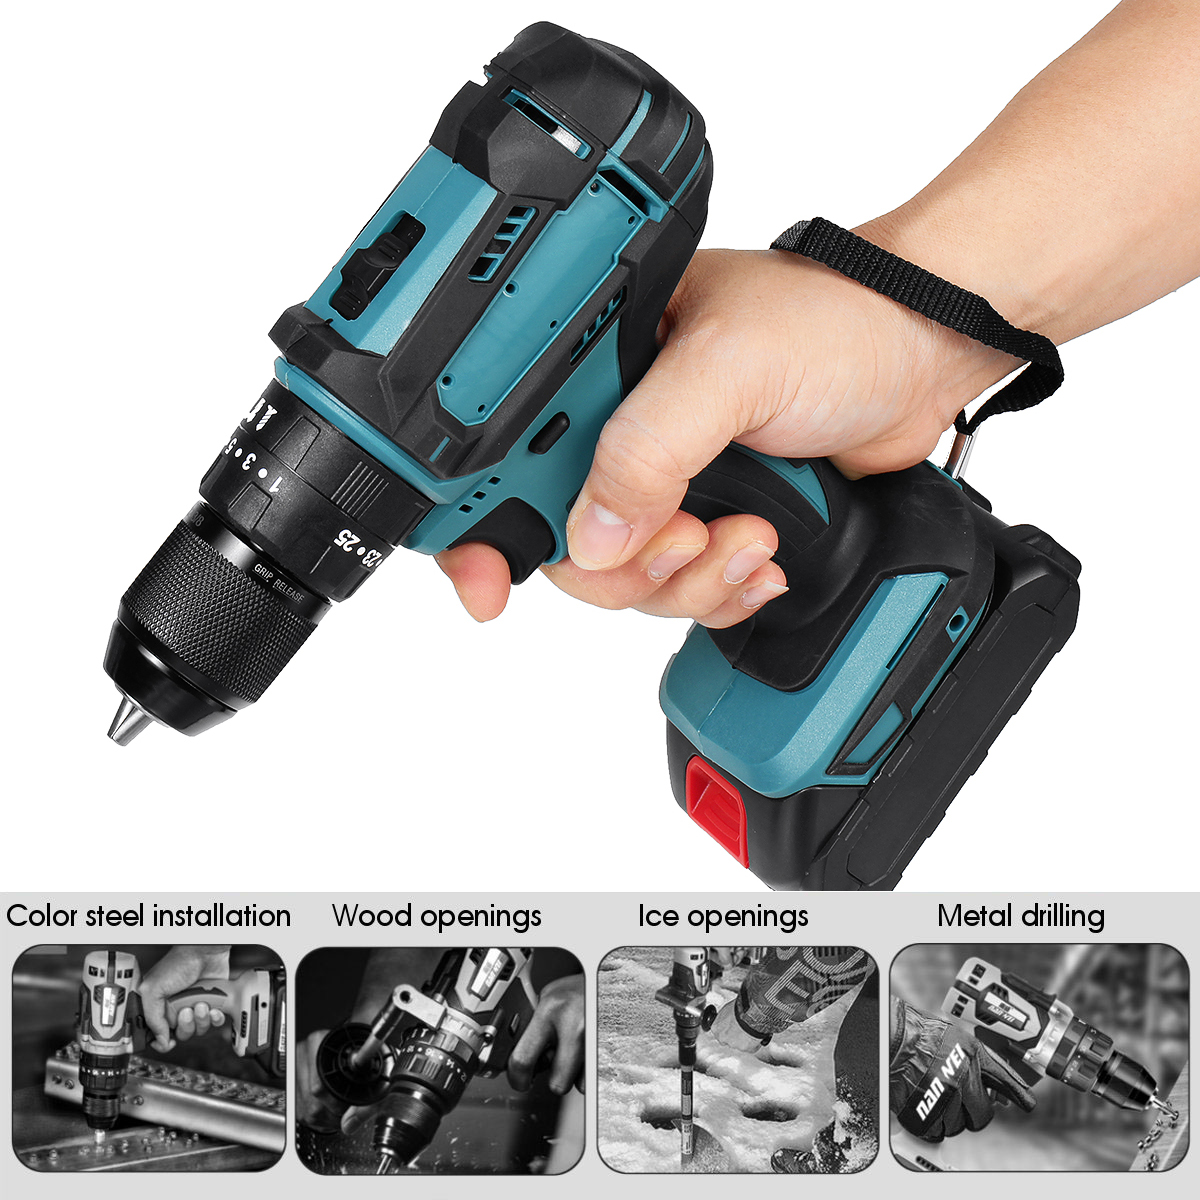 350Nm-4000-rpm-Electric-drill-3-In-1-Hammer-Flat-Drill-Screwdriver-Churn-Drill-with-Battery-1955074-14